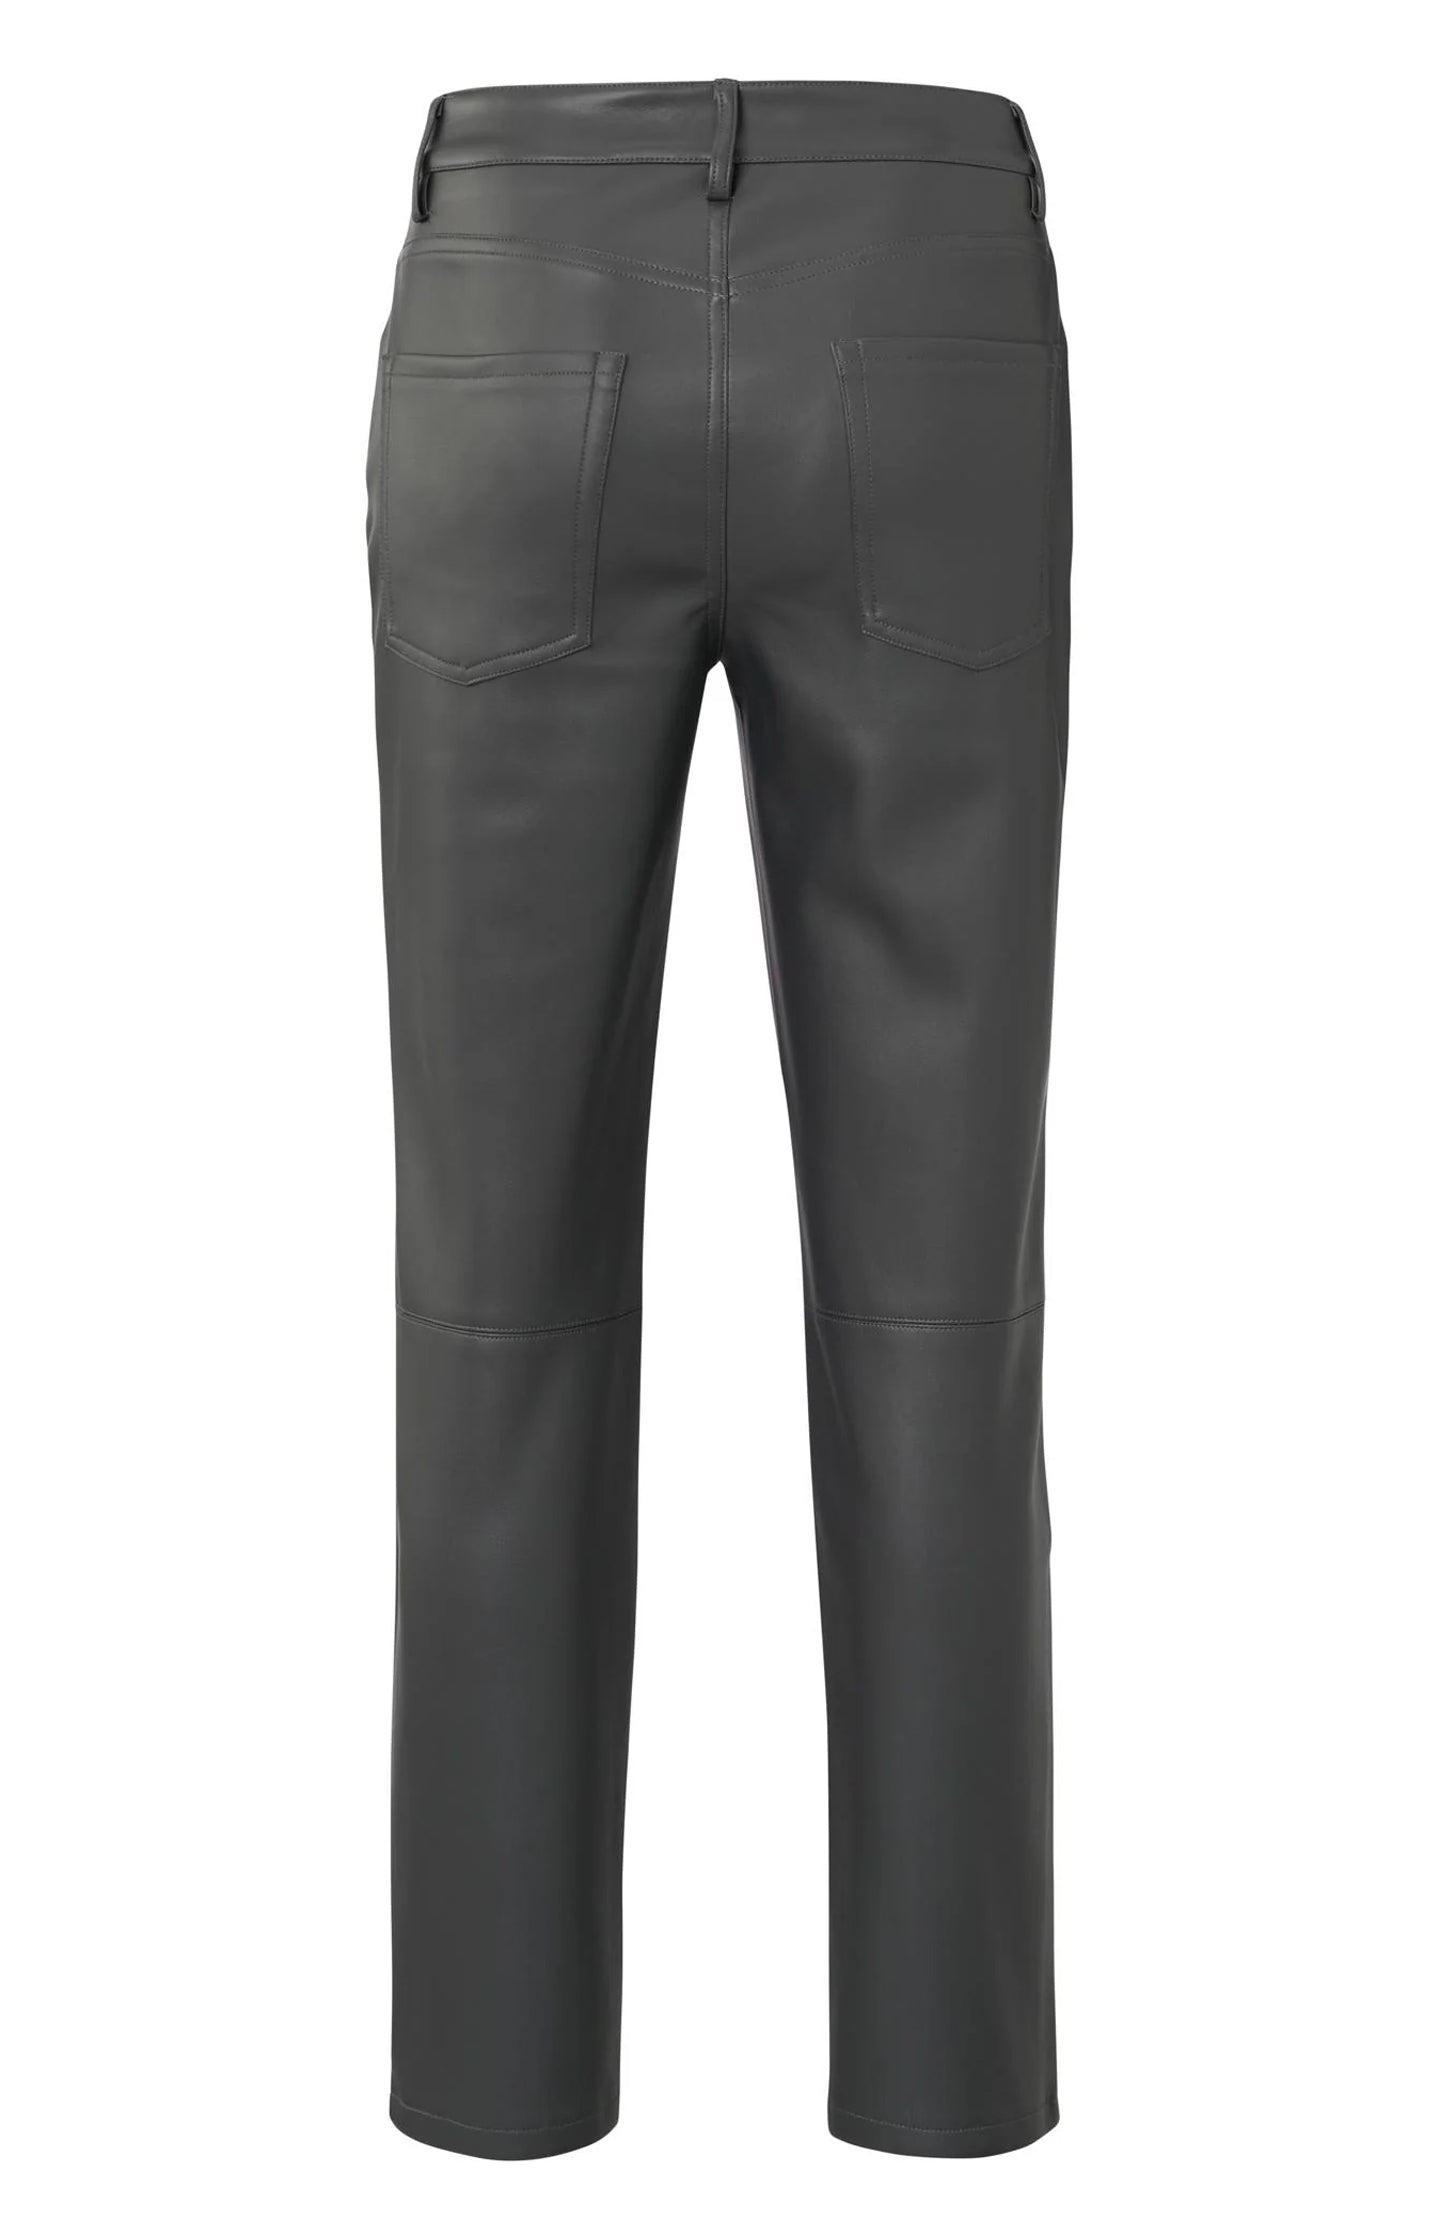 YAYA Faux Leather Trousers With 5 Pocket Style Grey